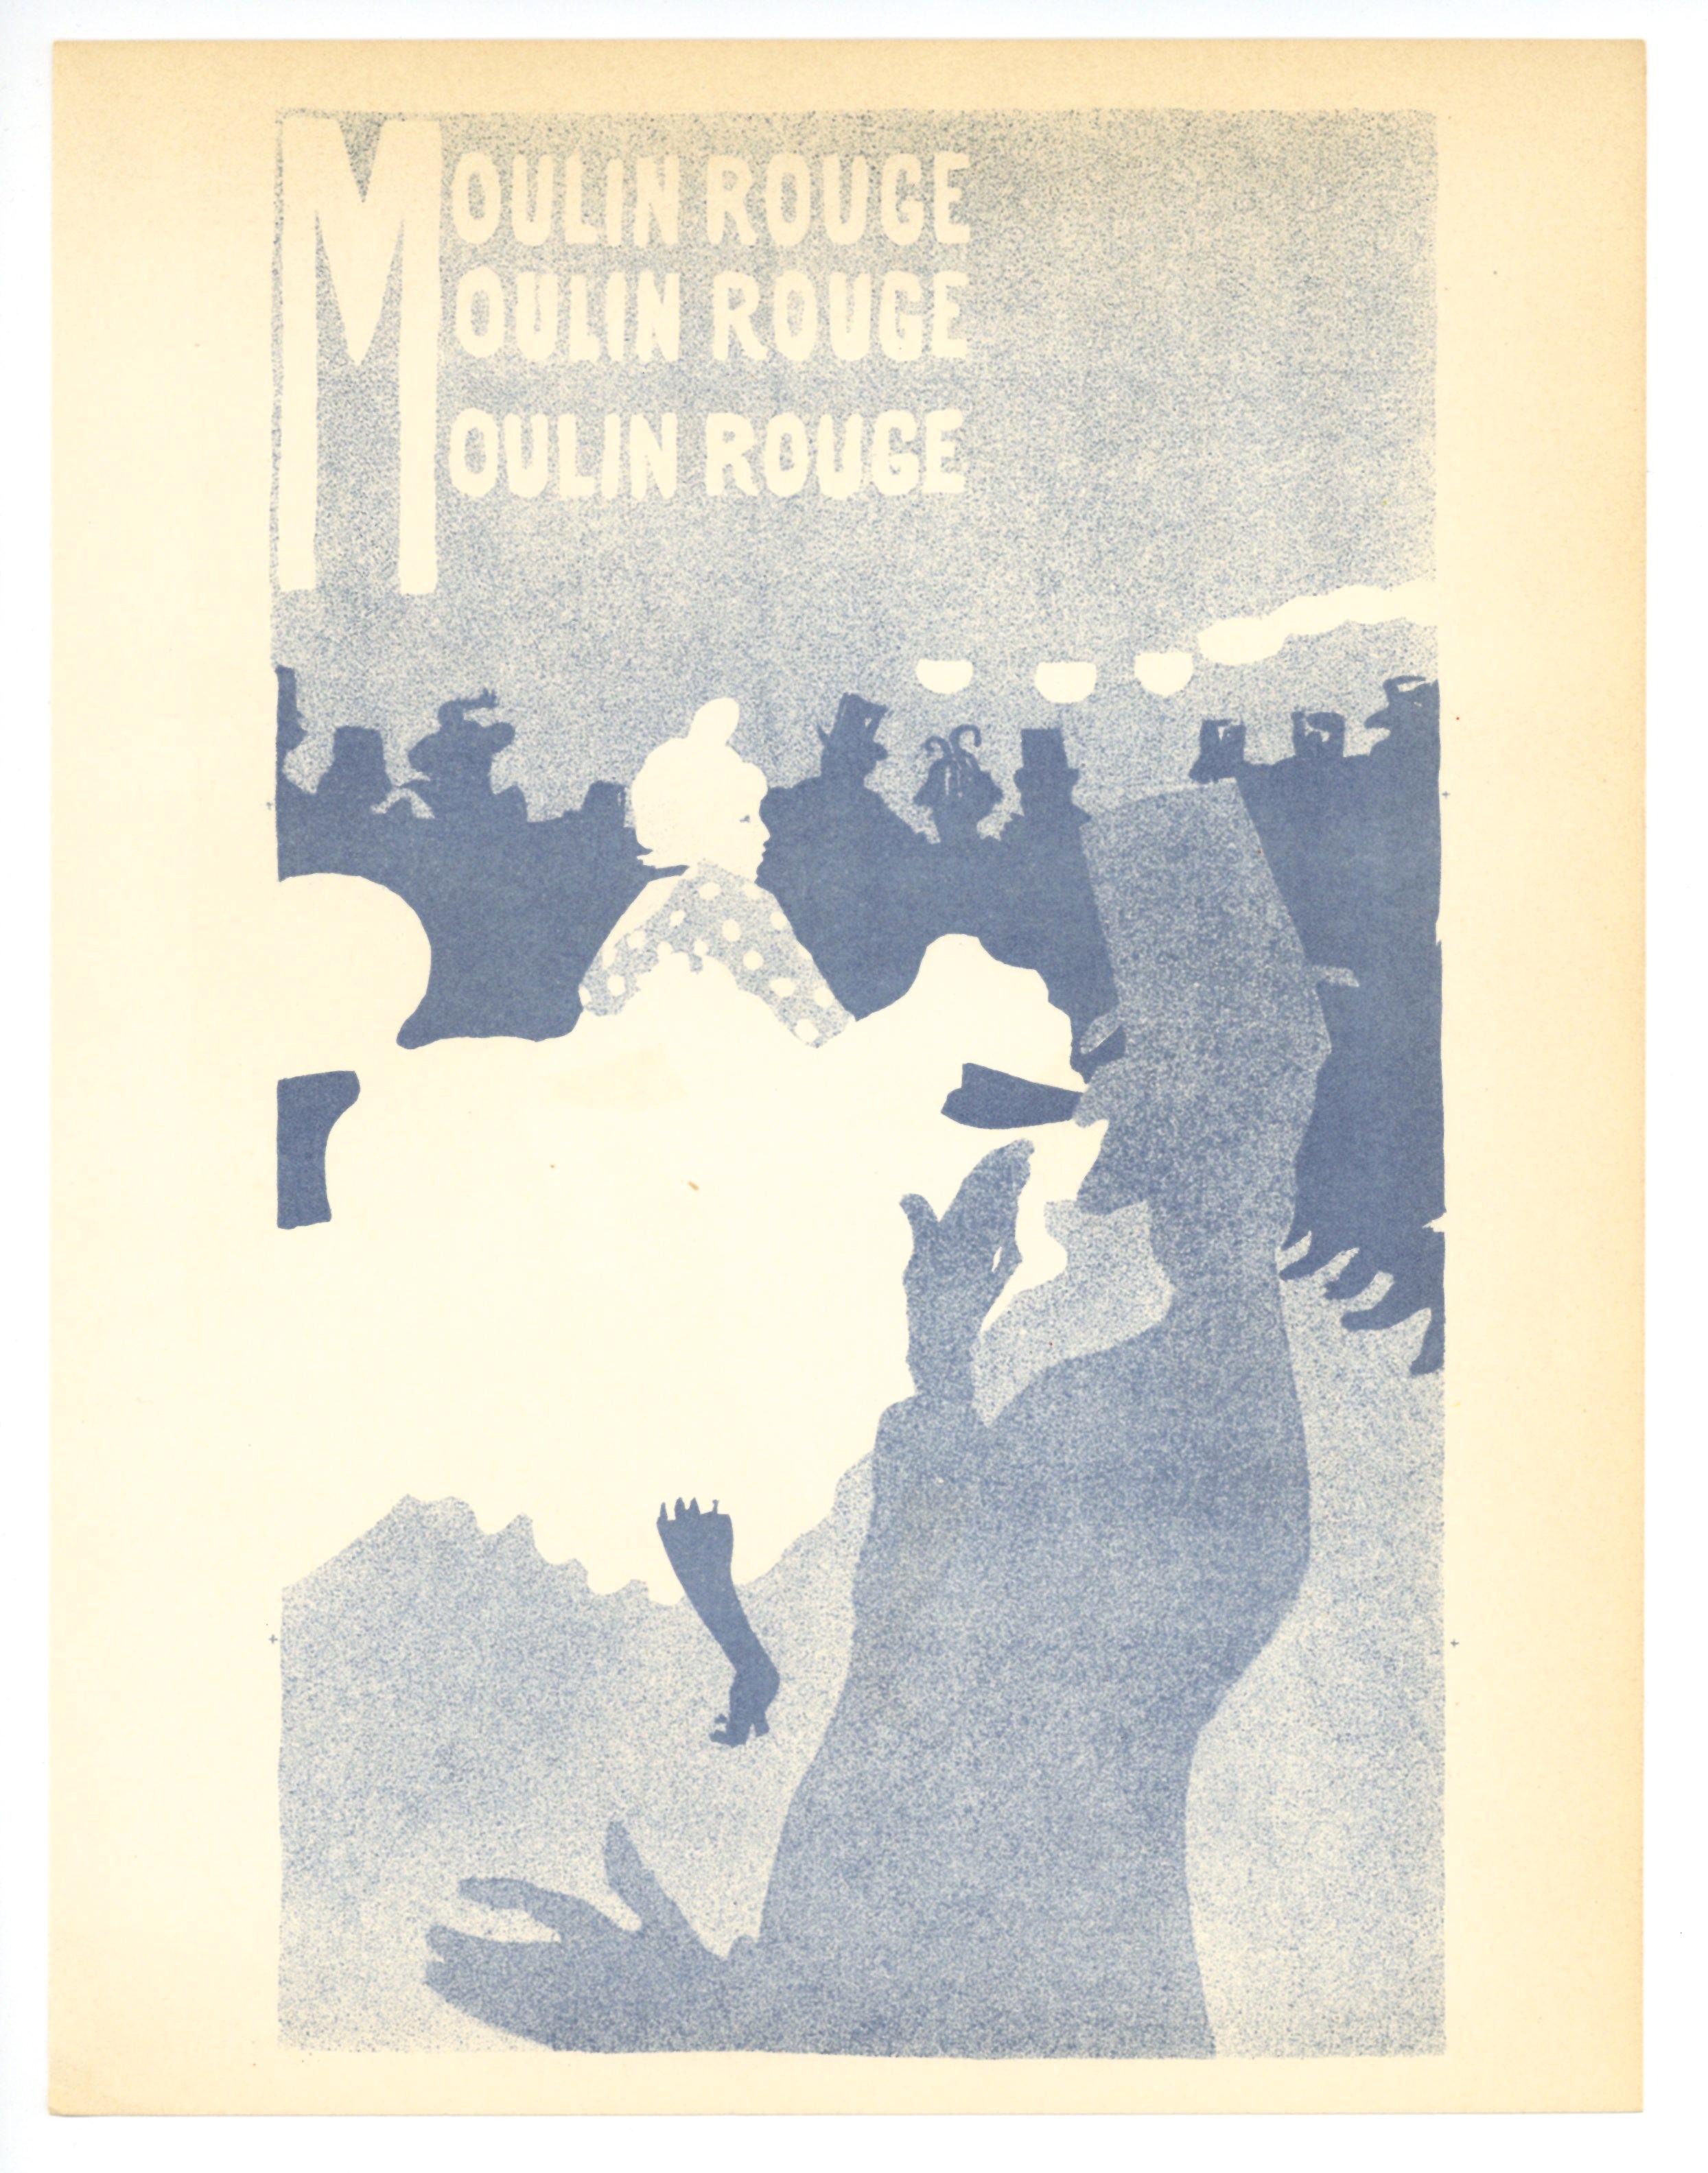 Medium: lithograph (after the poster). Printed in Paris in 1950 by Mourlot Freres, this multi-stone color lithograph faithfully reproduces the original Toulouse-Lautrec poster in a smaller-size format. Sheet size (each): 12 1/2 x 9 3/4 inches (320 x